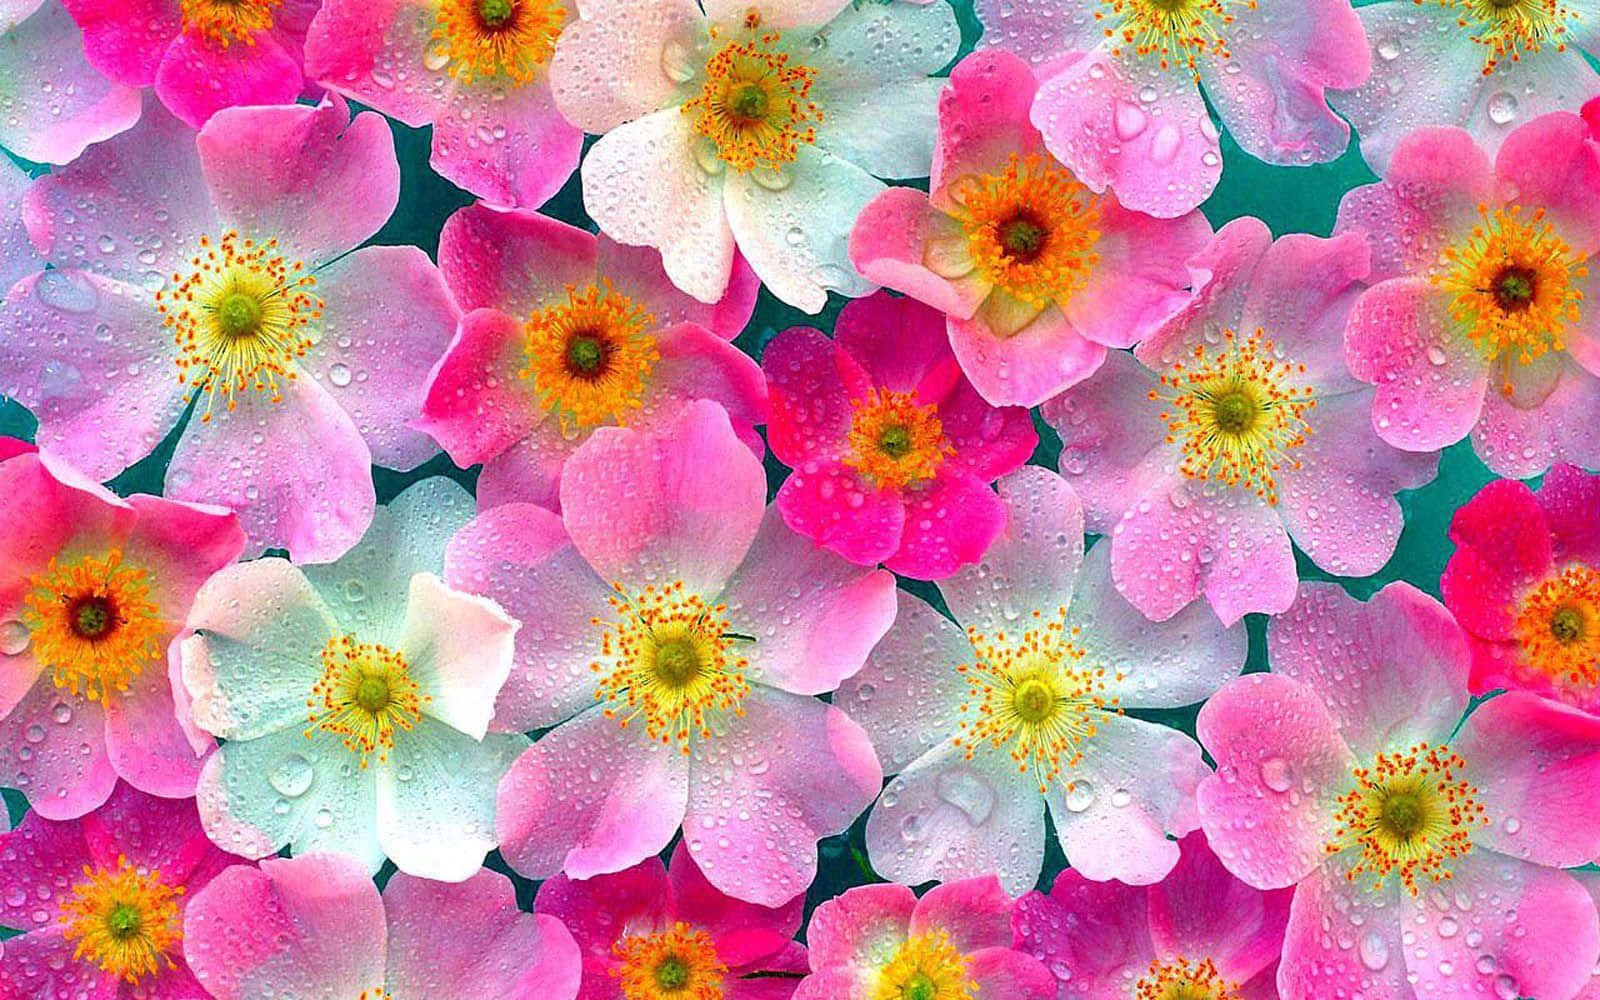 Brighten Up Your Day With This Beautiful Floral Laptop Pattern